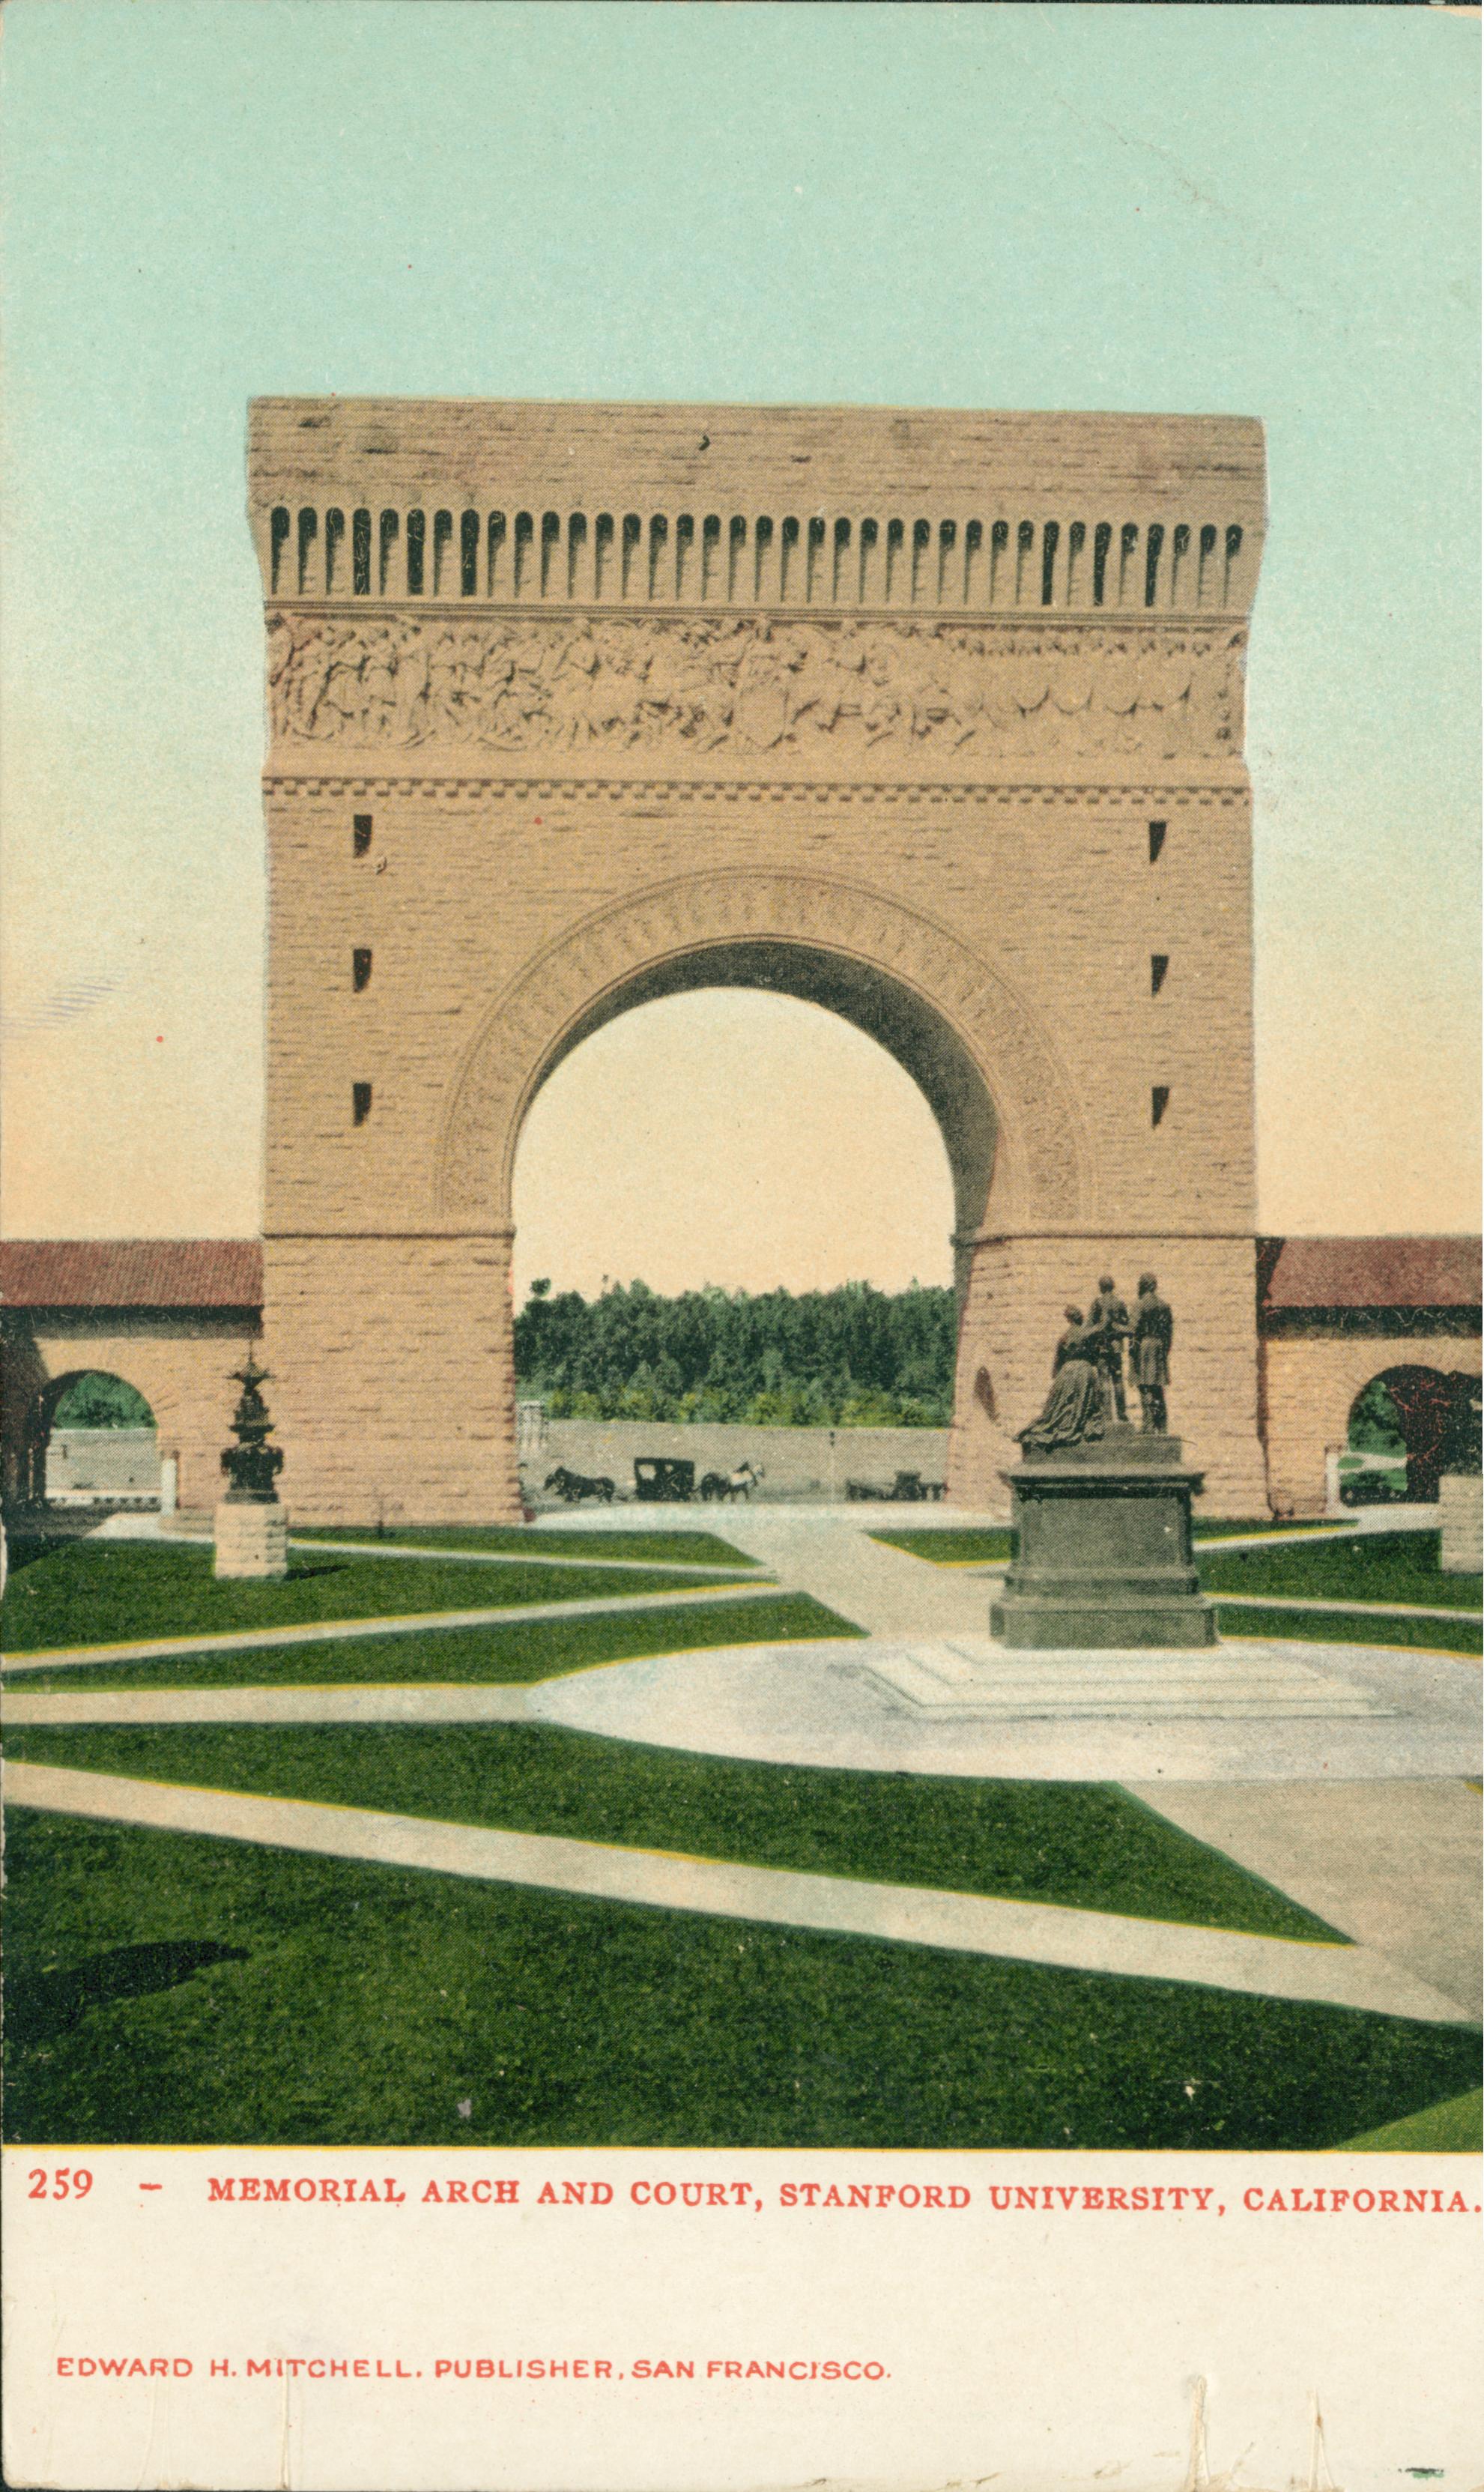 View of Memorial Arch in the Stanford University Quad